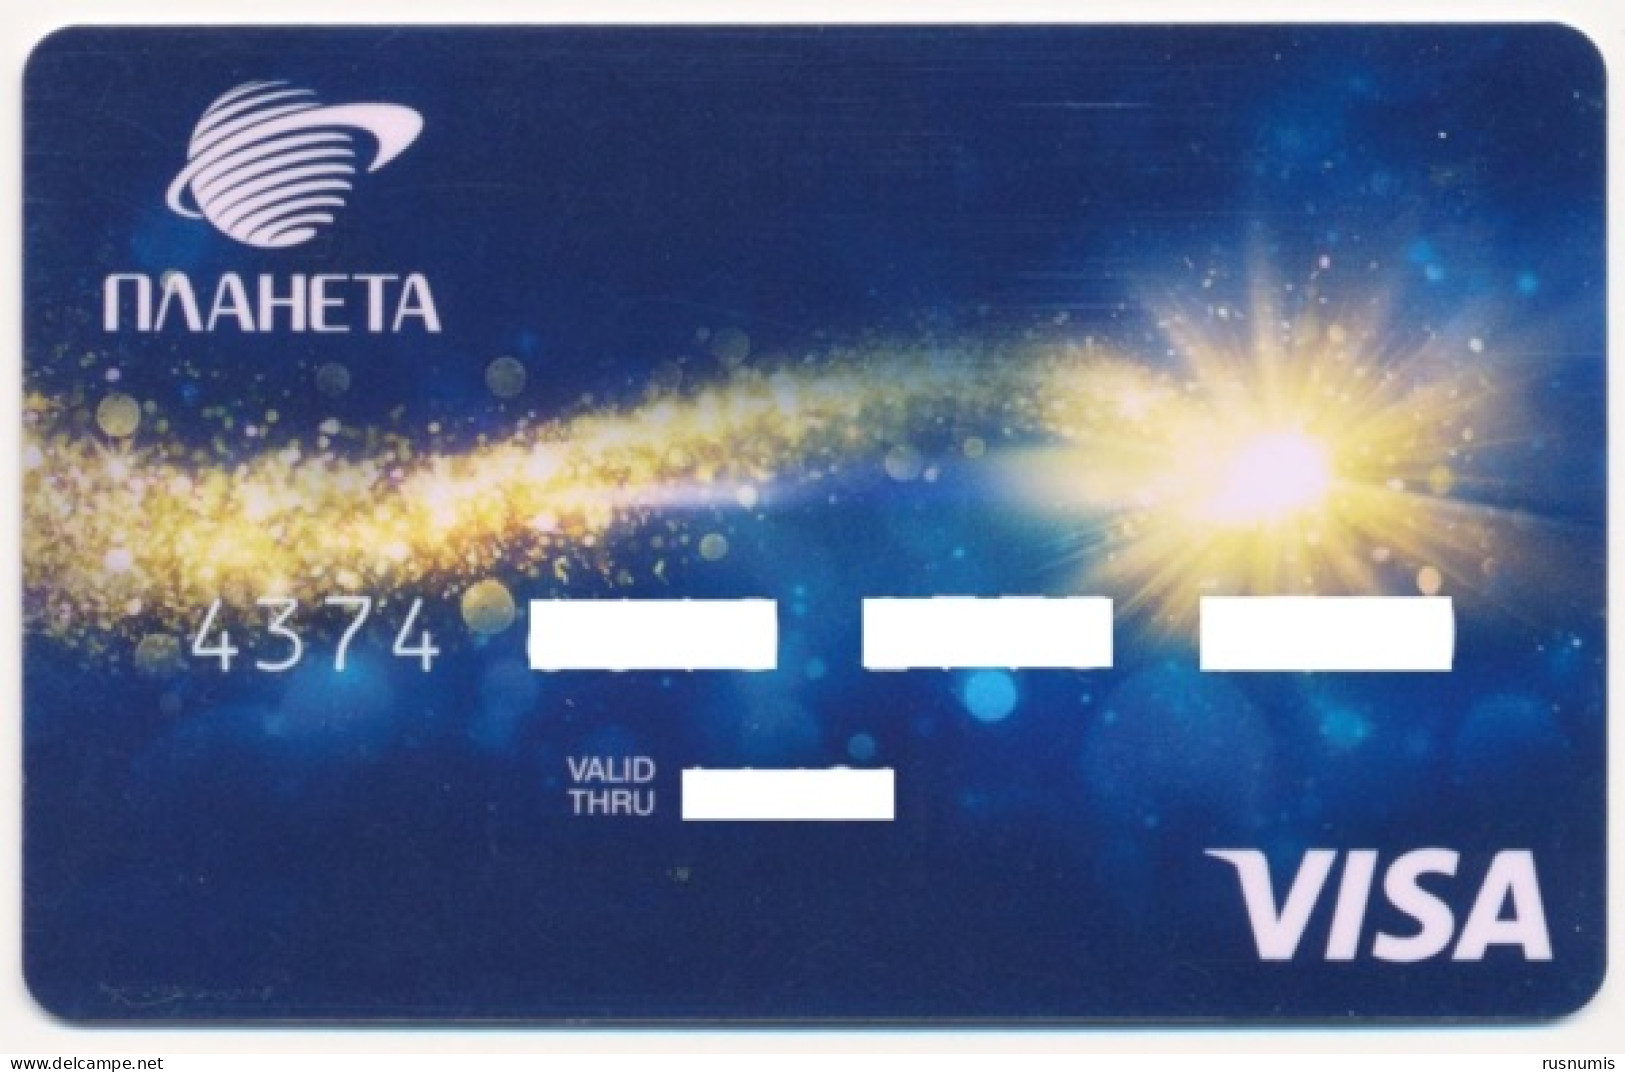 RUSSIA - RUSSIE - RUSSLAND GOLD CROWN SPACE VISA BANK CARD EXPIRED - Credit Cards (Exp. Date Min. 10 Years)